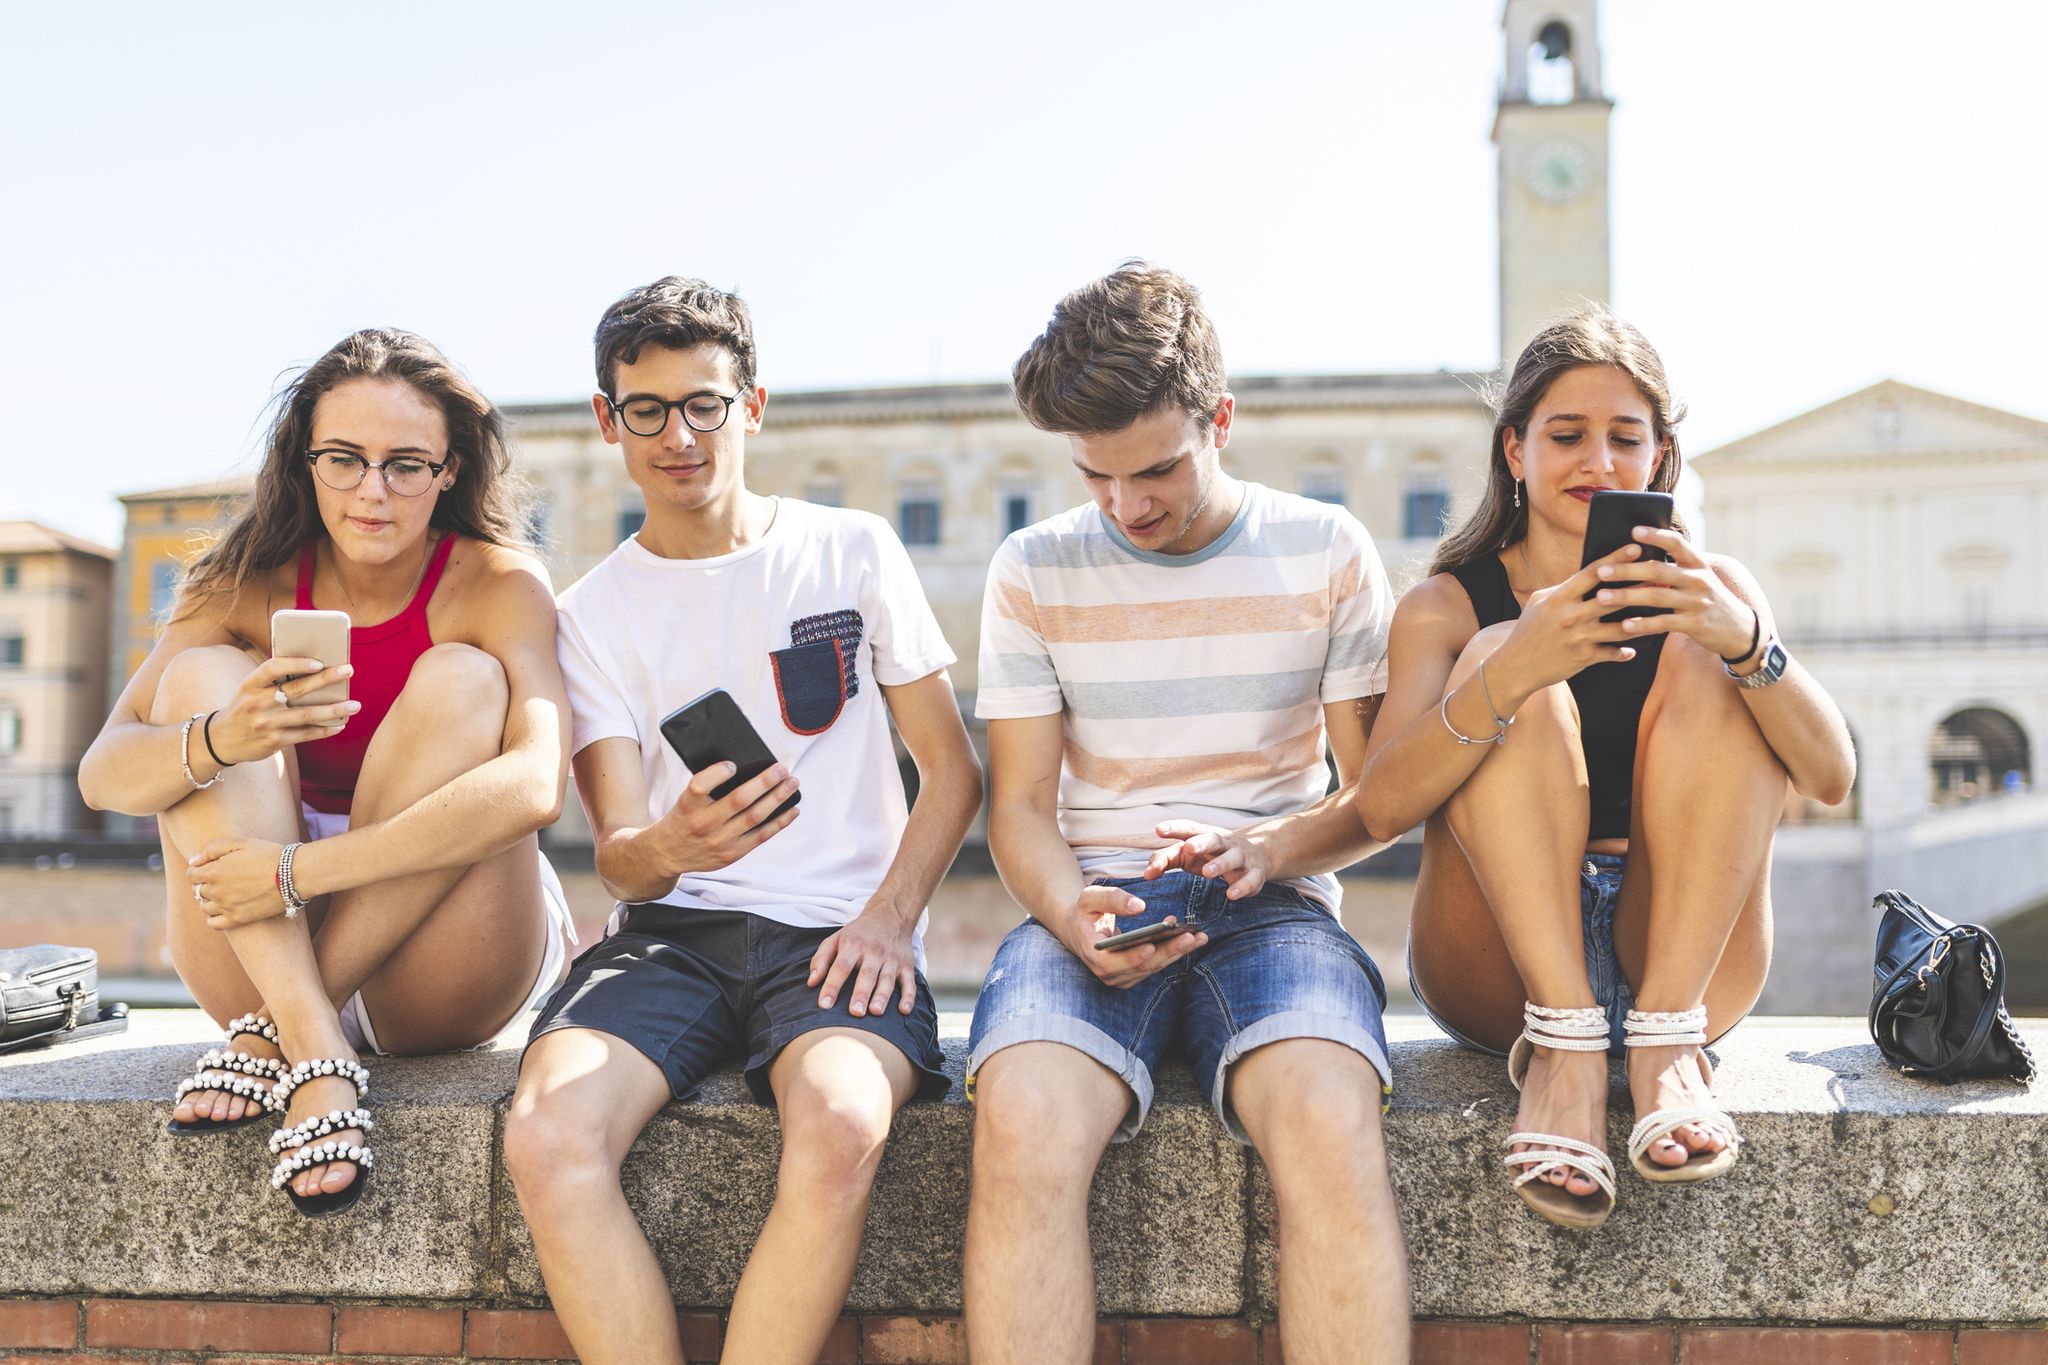 Italy, Pisa, group of four friends sitting together on a wall using cell phones